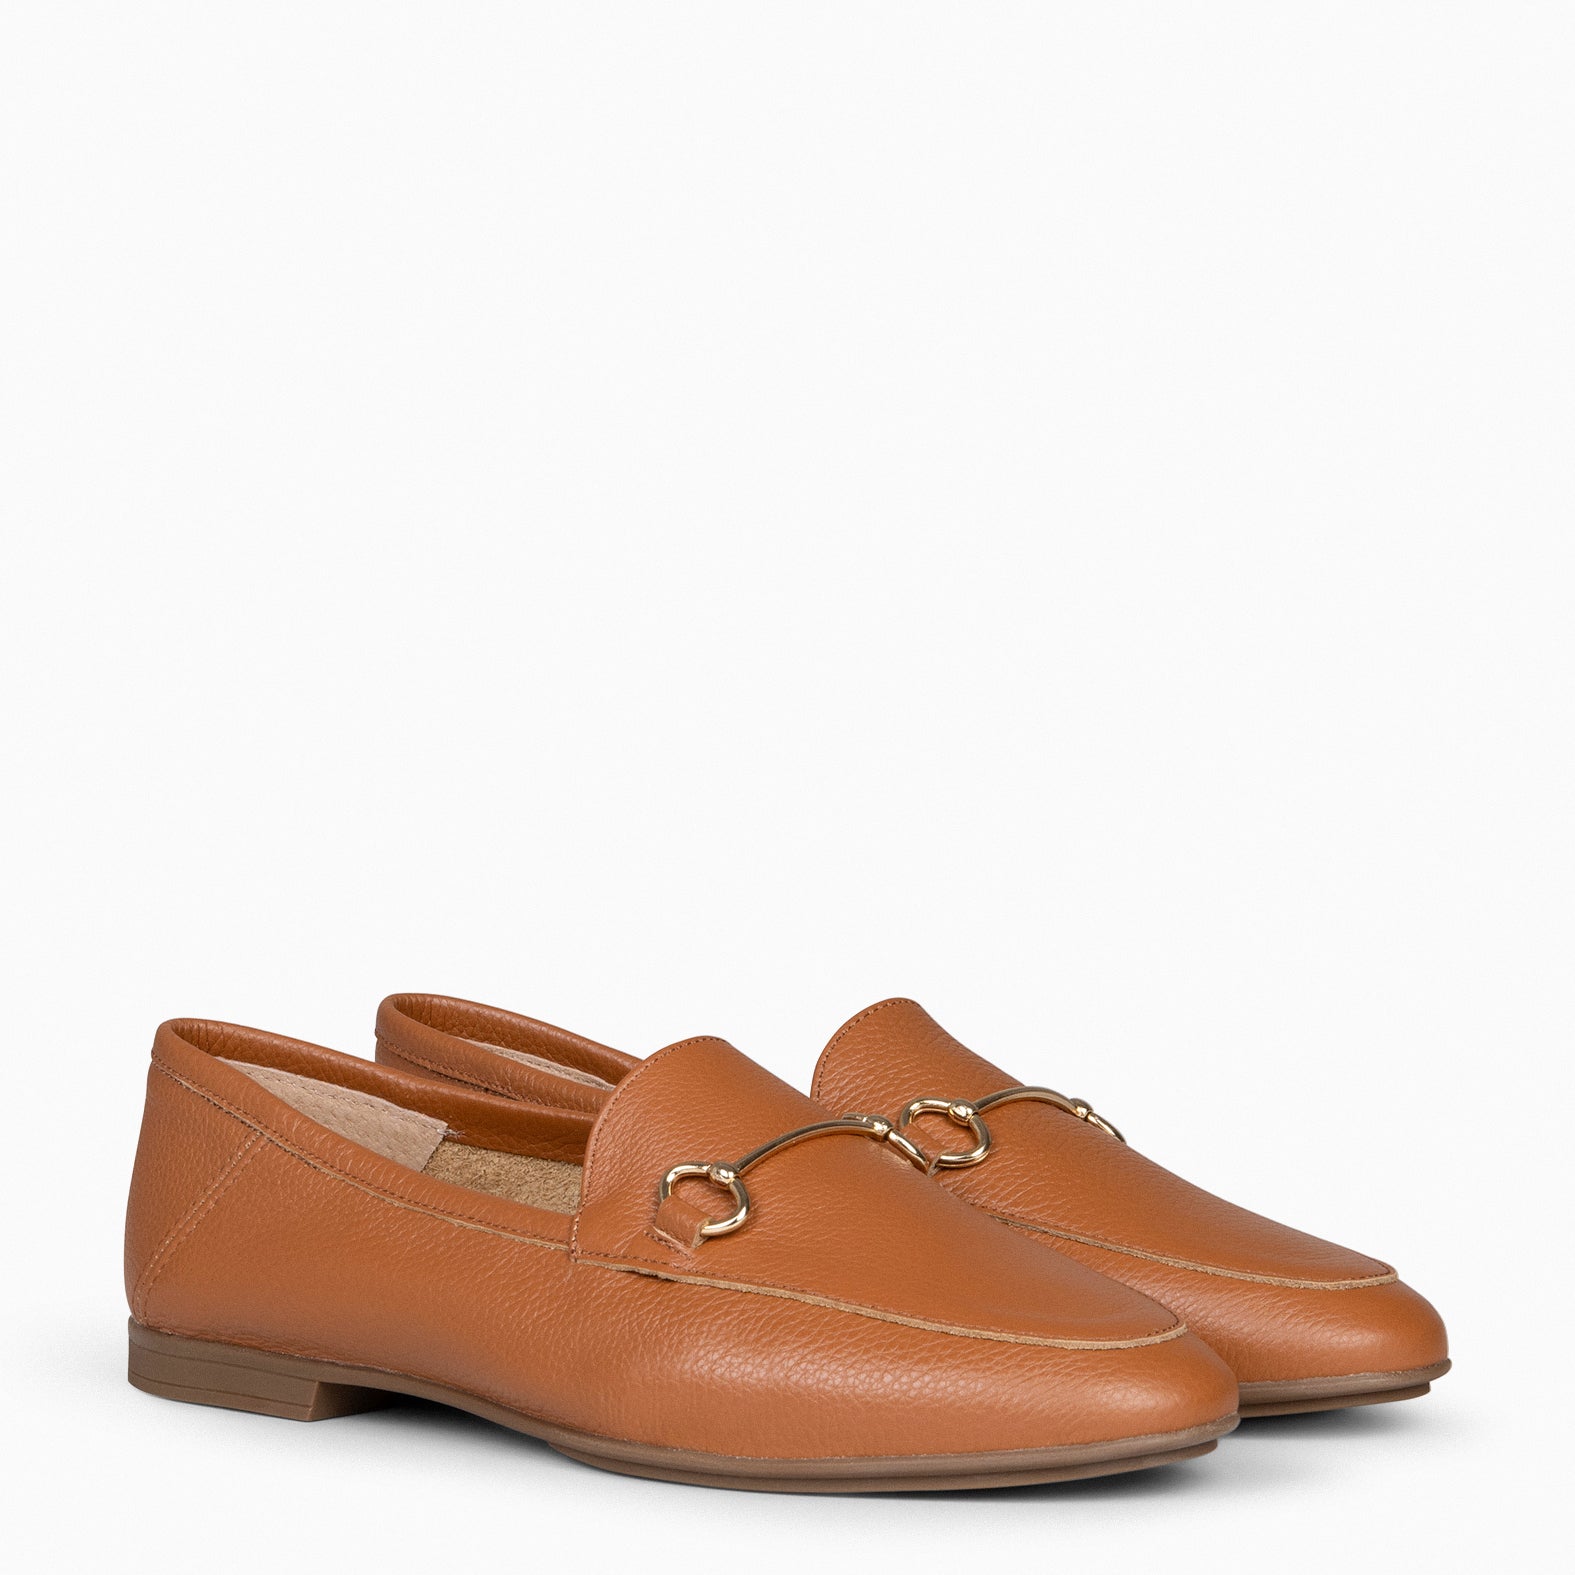 STYLE – BROWN moccasins with horsebit